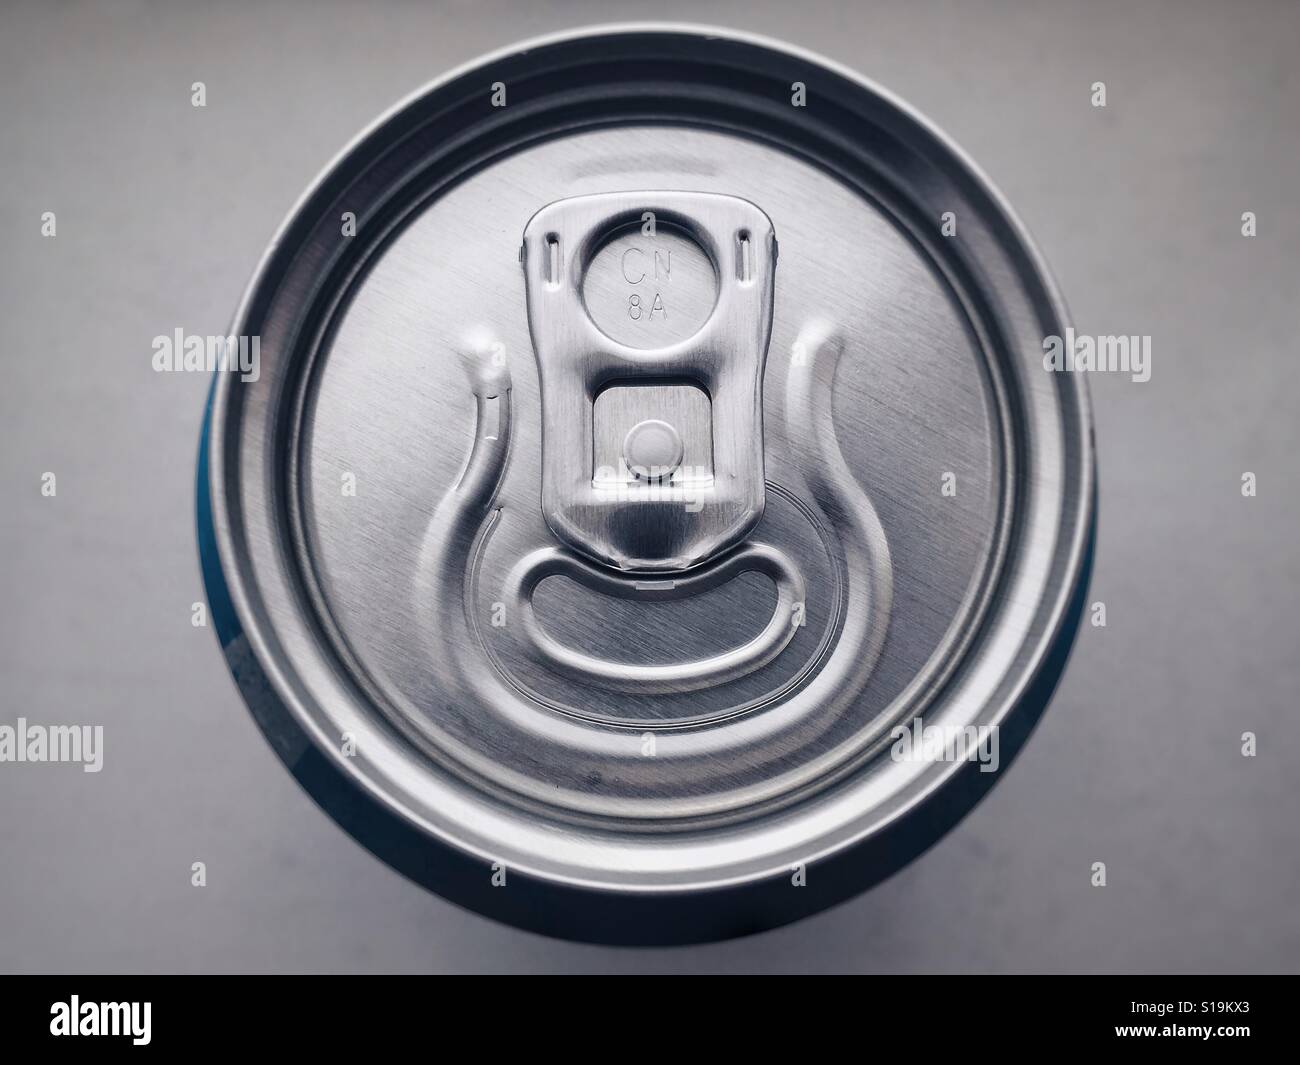 Cold drinks can. Stock Photo